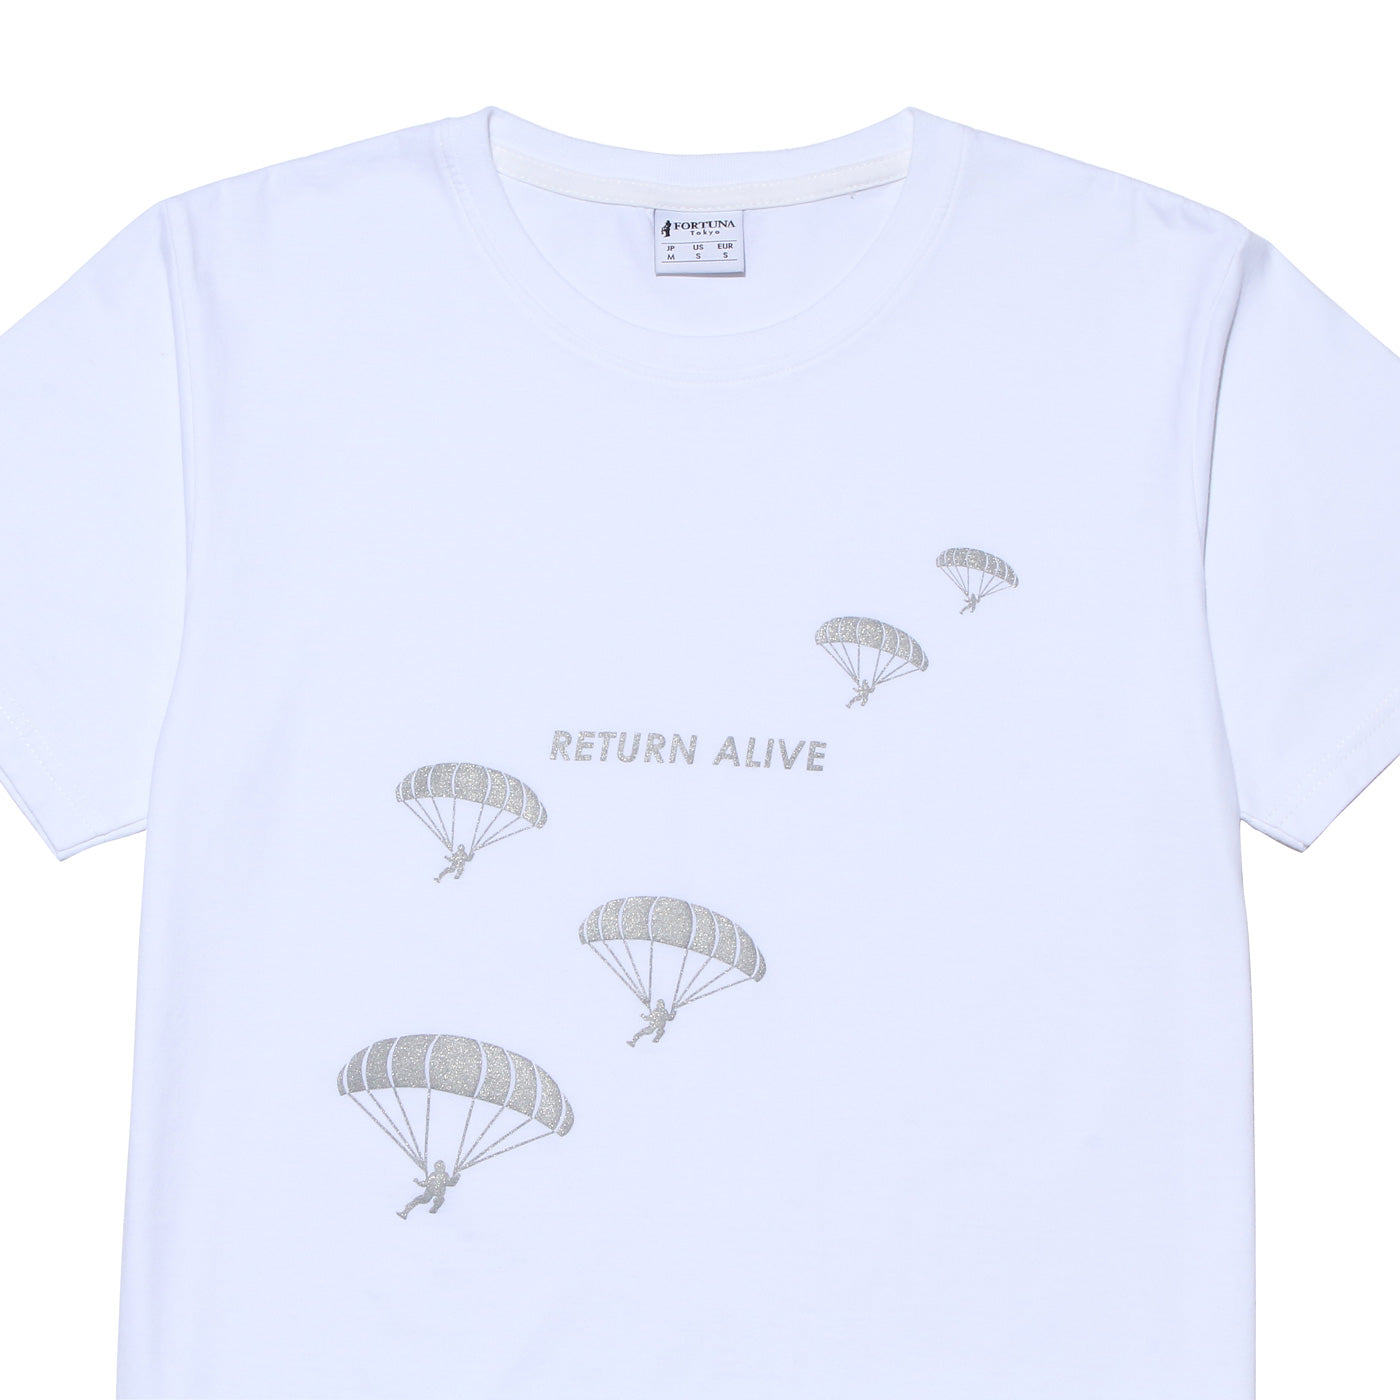 Disinfecting Cloth T Shirt Unisex 100% Cotton -Return Alive- White Made in Japan FORTUNA Tokyo